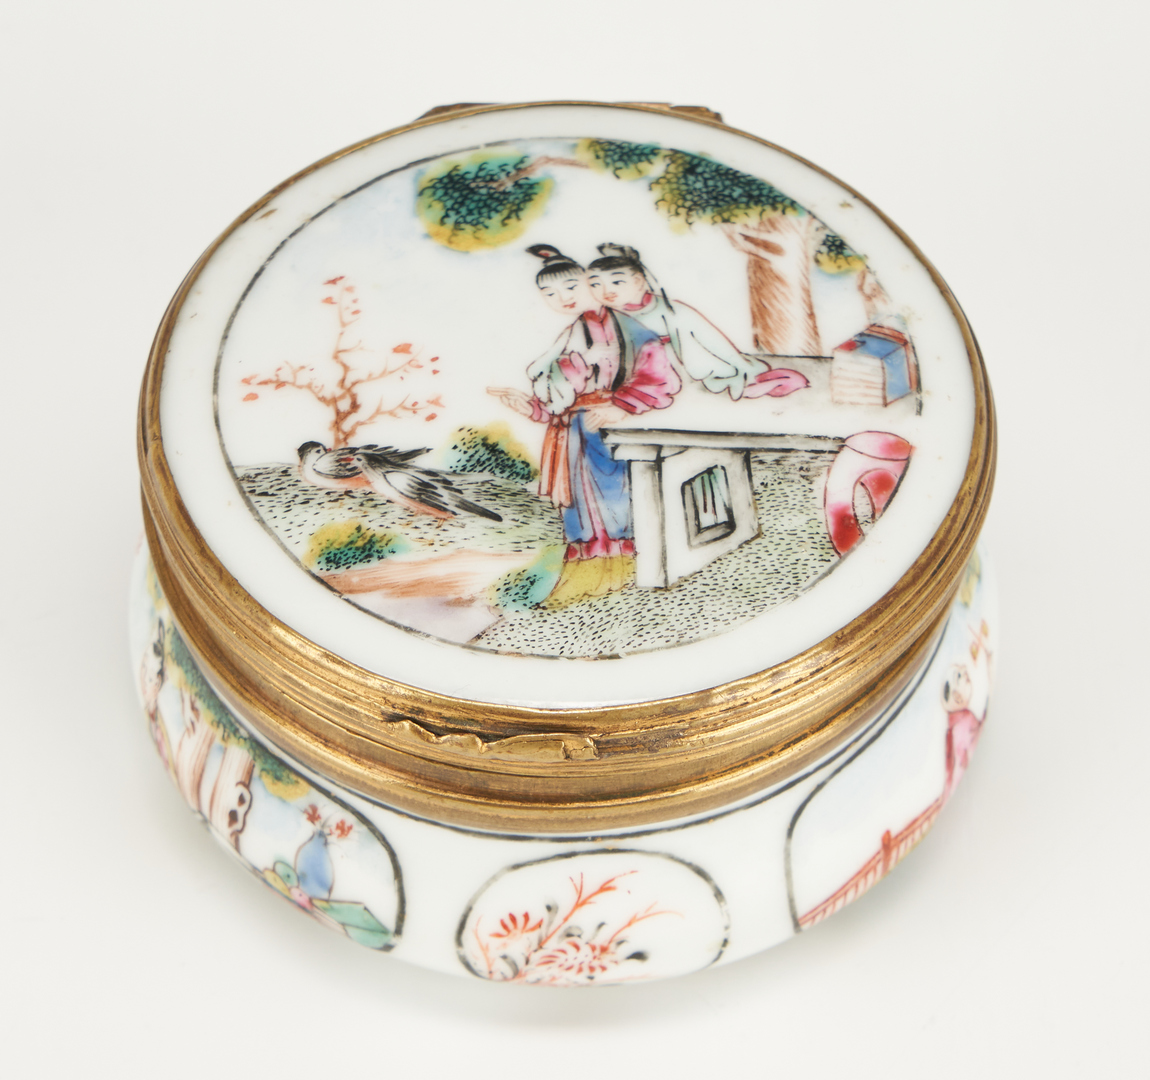 Lot 30: 4 Chinese Export Porcelain Items incl. Snuff or Paste Box